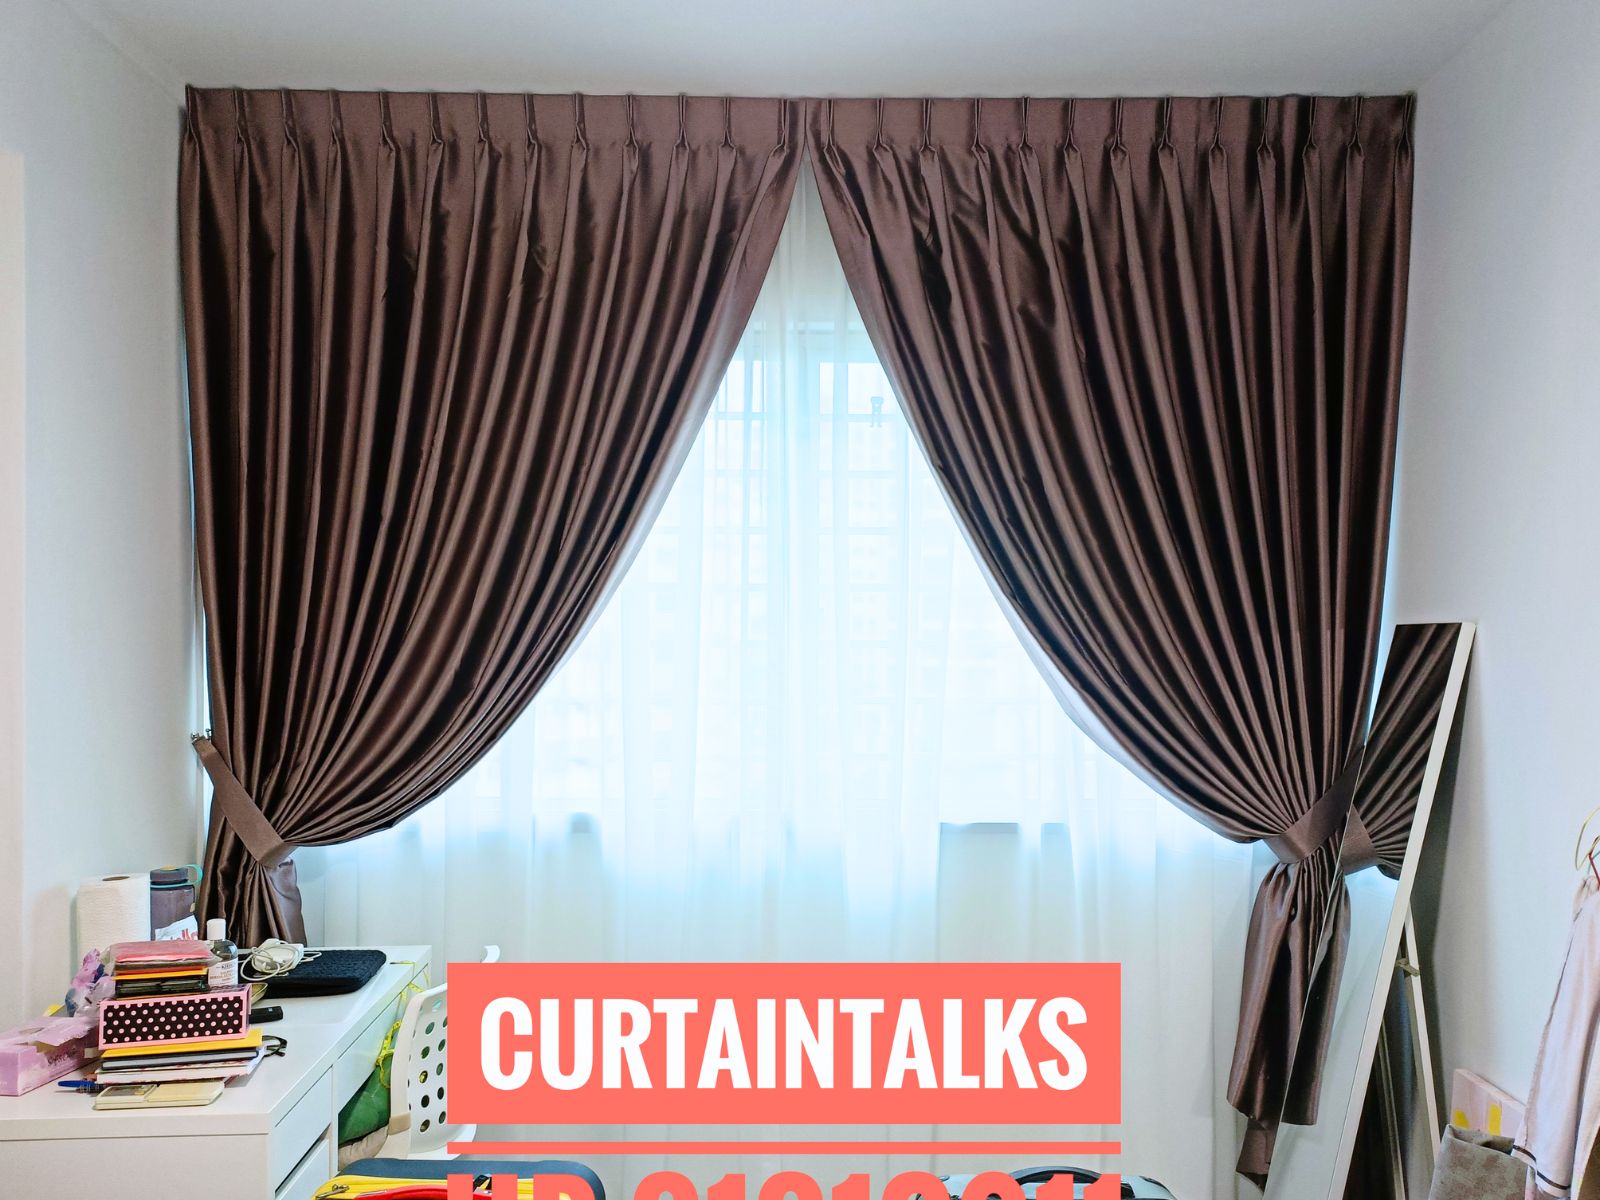 This is a Picture of Day and night curtain picture  for Singapore 4 room HDB flat, common room, day and night curtain, Blk 39 Bedok South